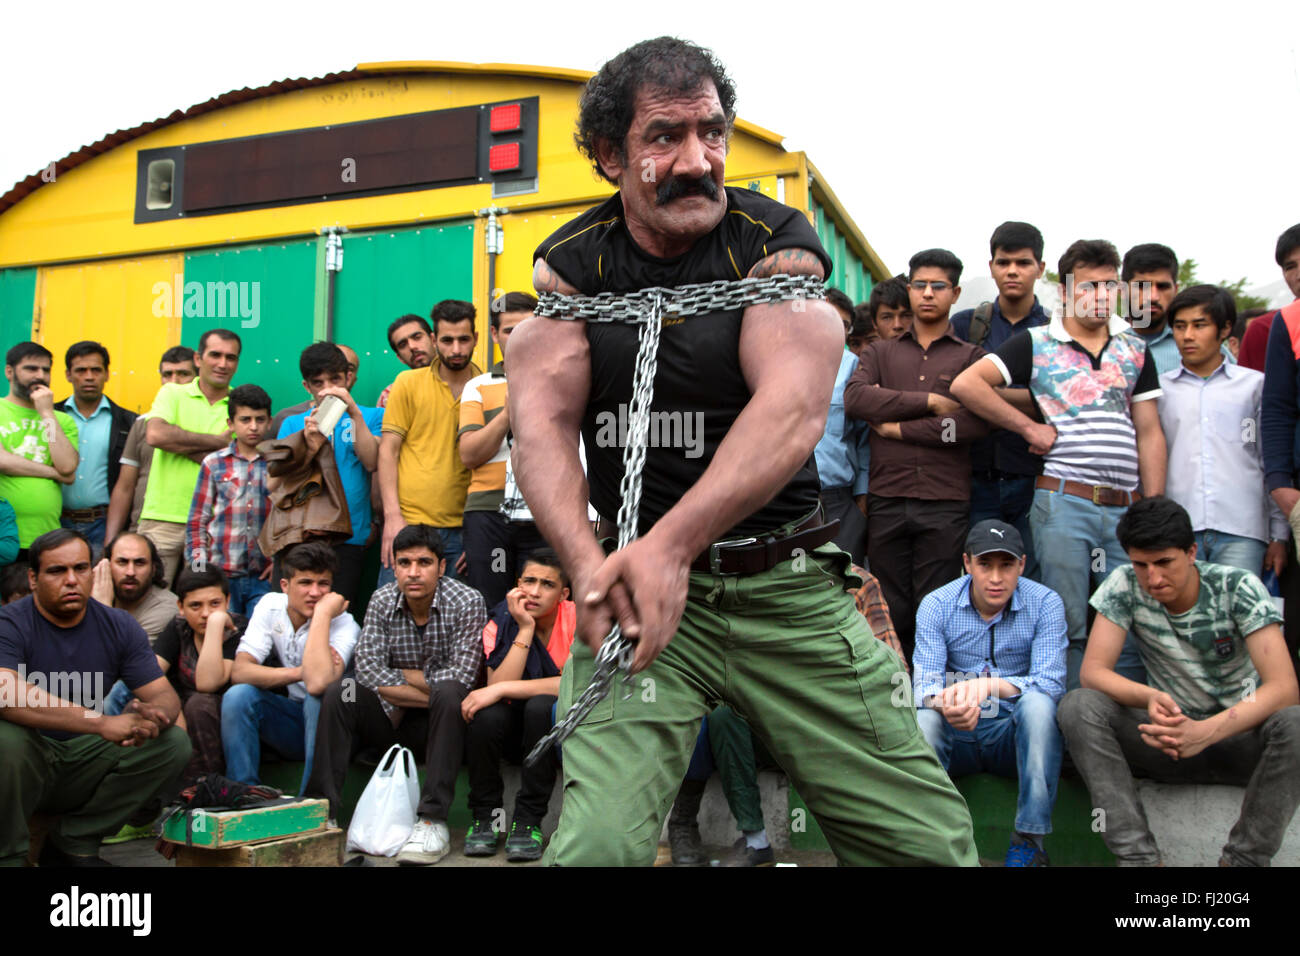 A man theatrically struggles to break free of chains in front of the Imamzadeh Saleh mausoleum, Tehran , Iran Stock Photo